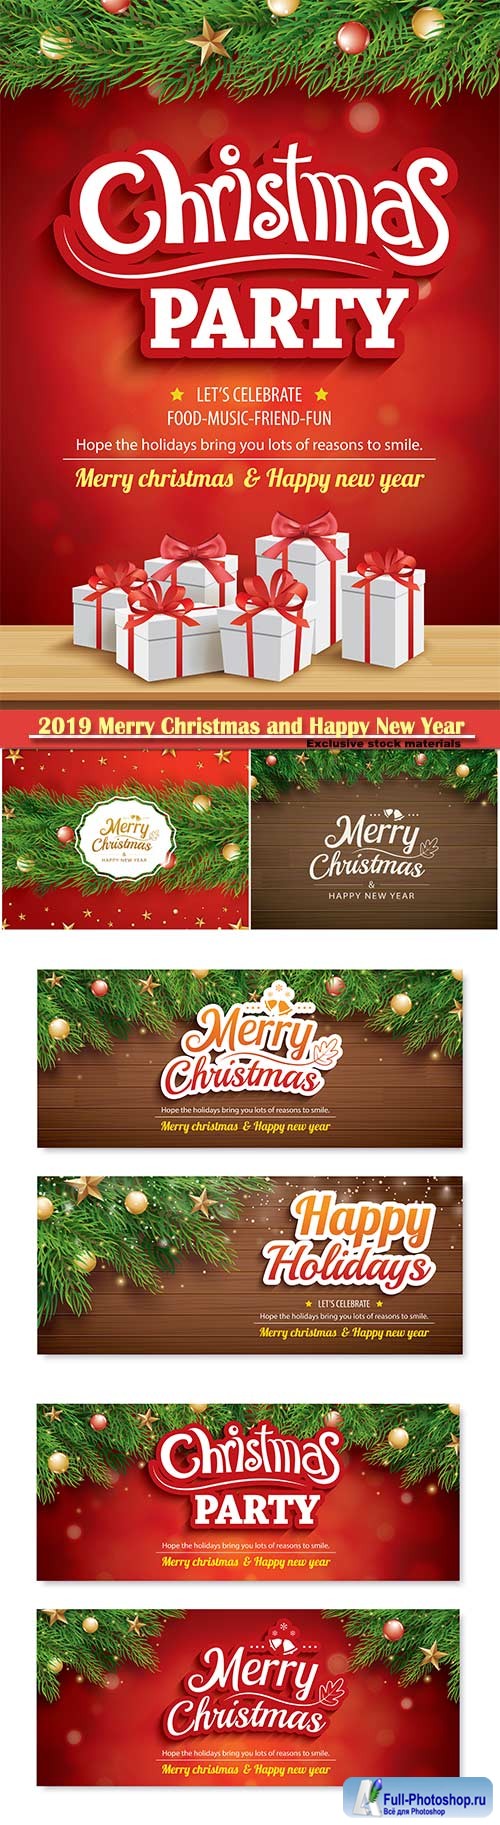 2019 Merry Christmas and Happy New Year vector design # 13